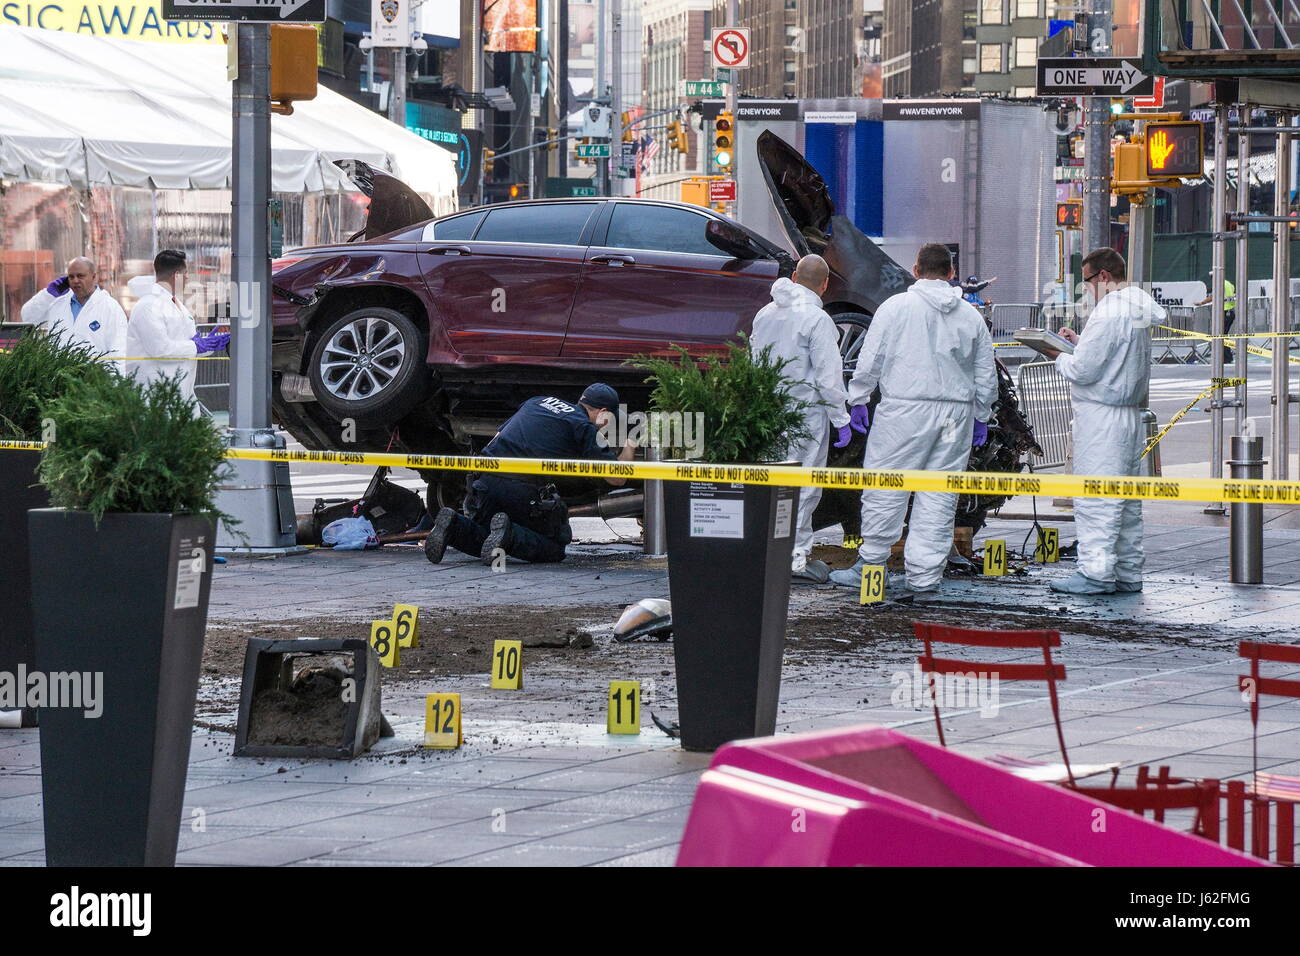 New York, New York, USA. 18th May, 2017. Crime scene markers near the damaged vehicle as Police officers and emergency workers investigate the scene of a car crash in Times Square that took the life of an 18 year-old Michigan girl and injured 22 others. Credit: Kevin C. Downs/ZUMA Wire/ZUMAPRESS.com/Alamy Live News Stock Photo